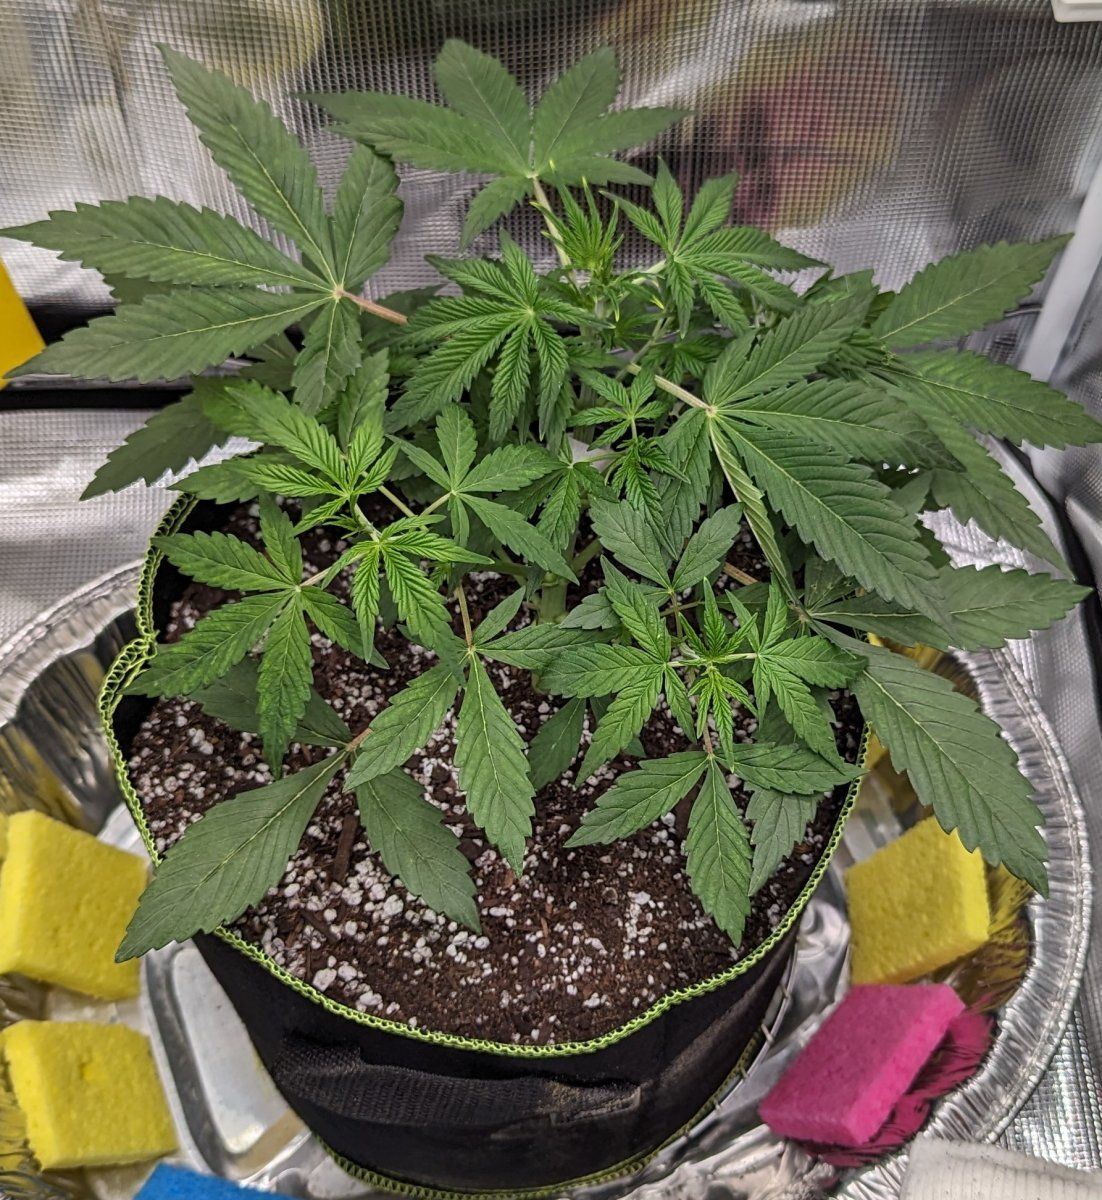 New grower need help with high humidity